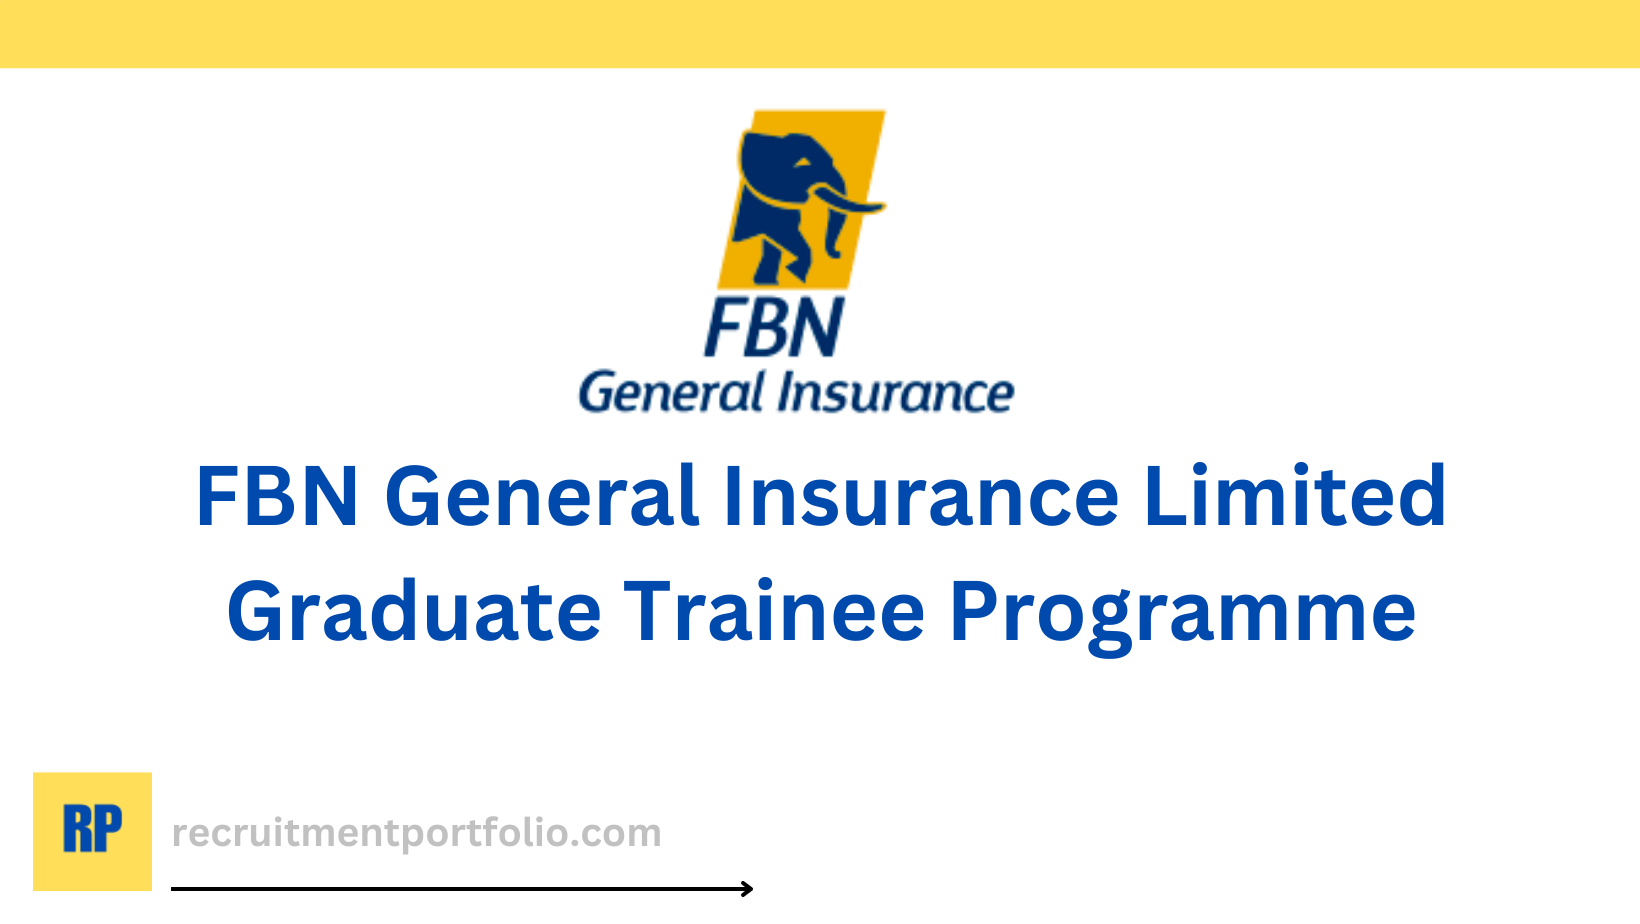 FBN General Insurance Limited